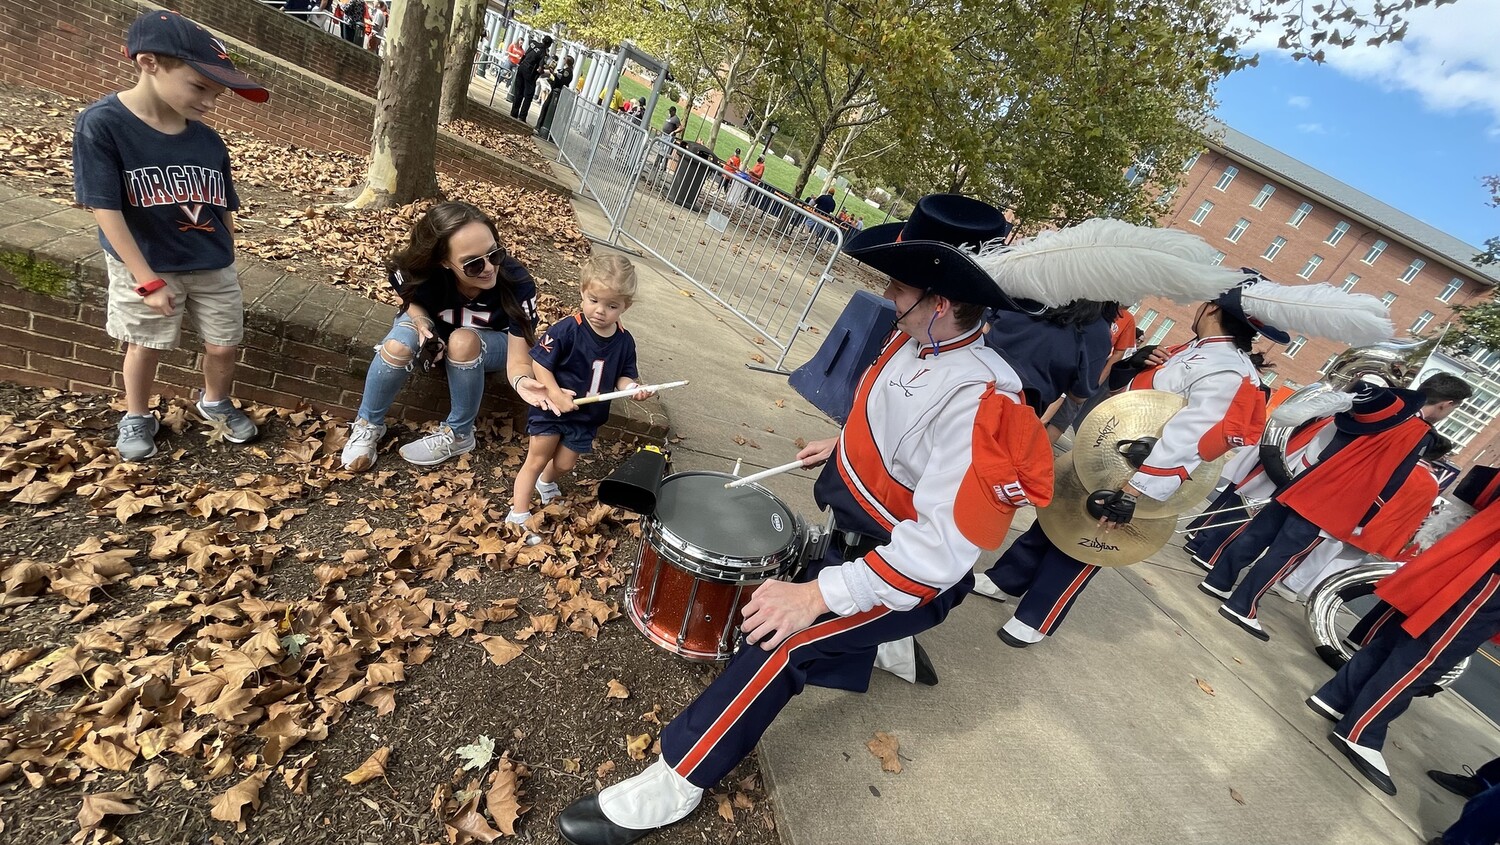 UVA Drumline Center Snare gives an impromptu drum lesson to a young football fan on October 23, 2021.